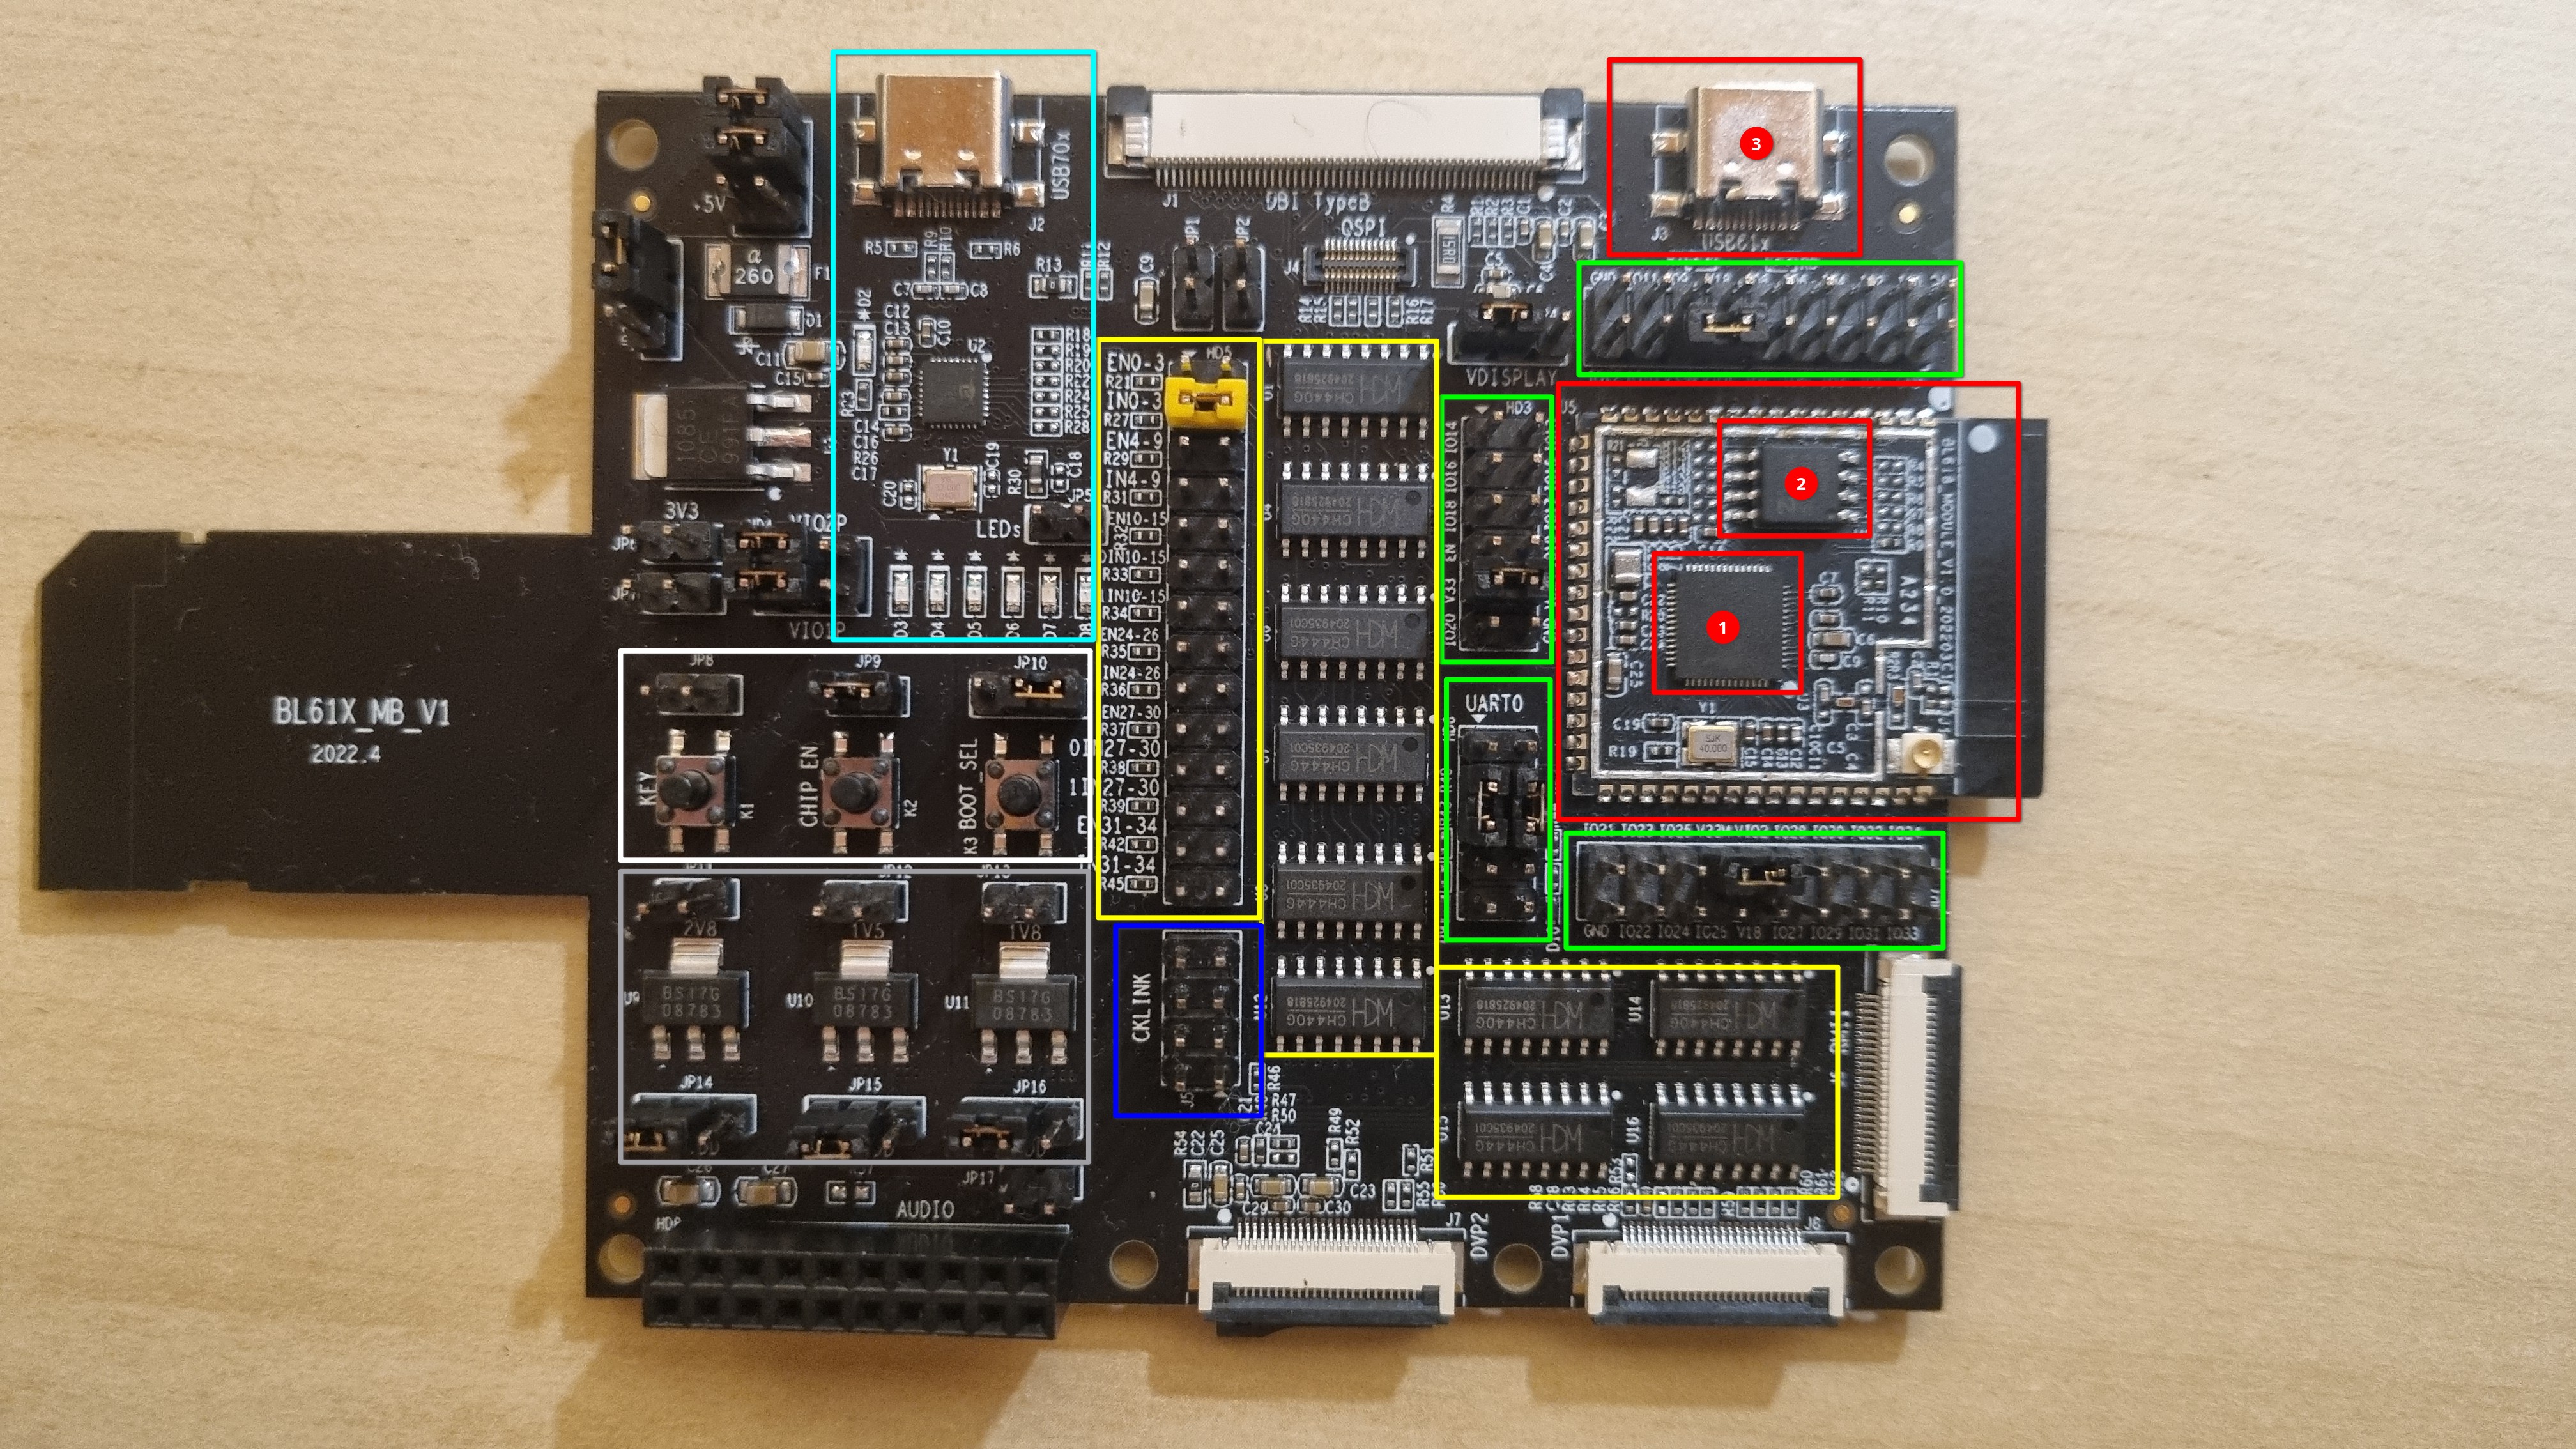 The BL618 development board with annotations)